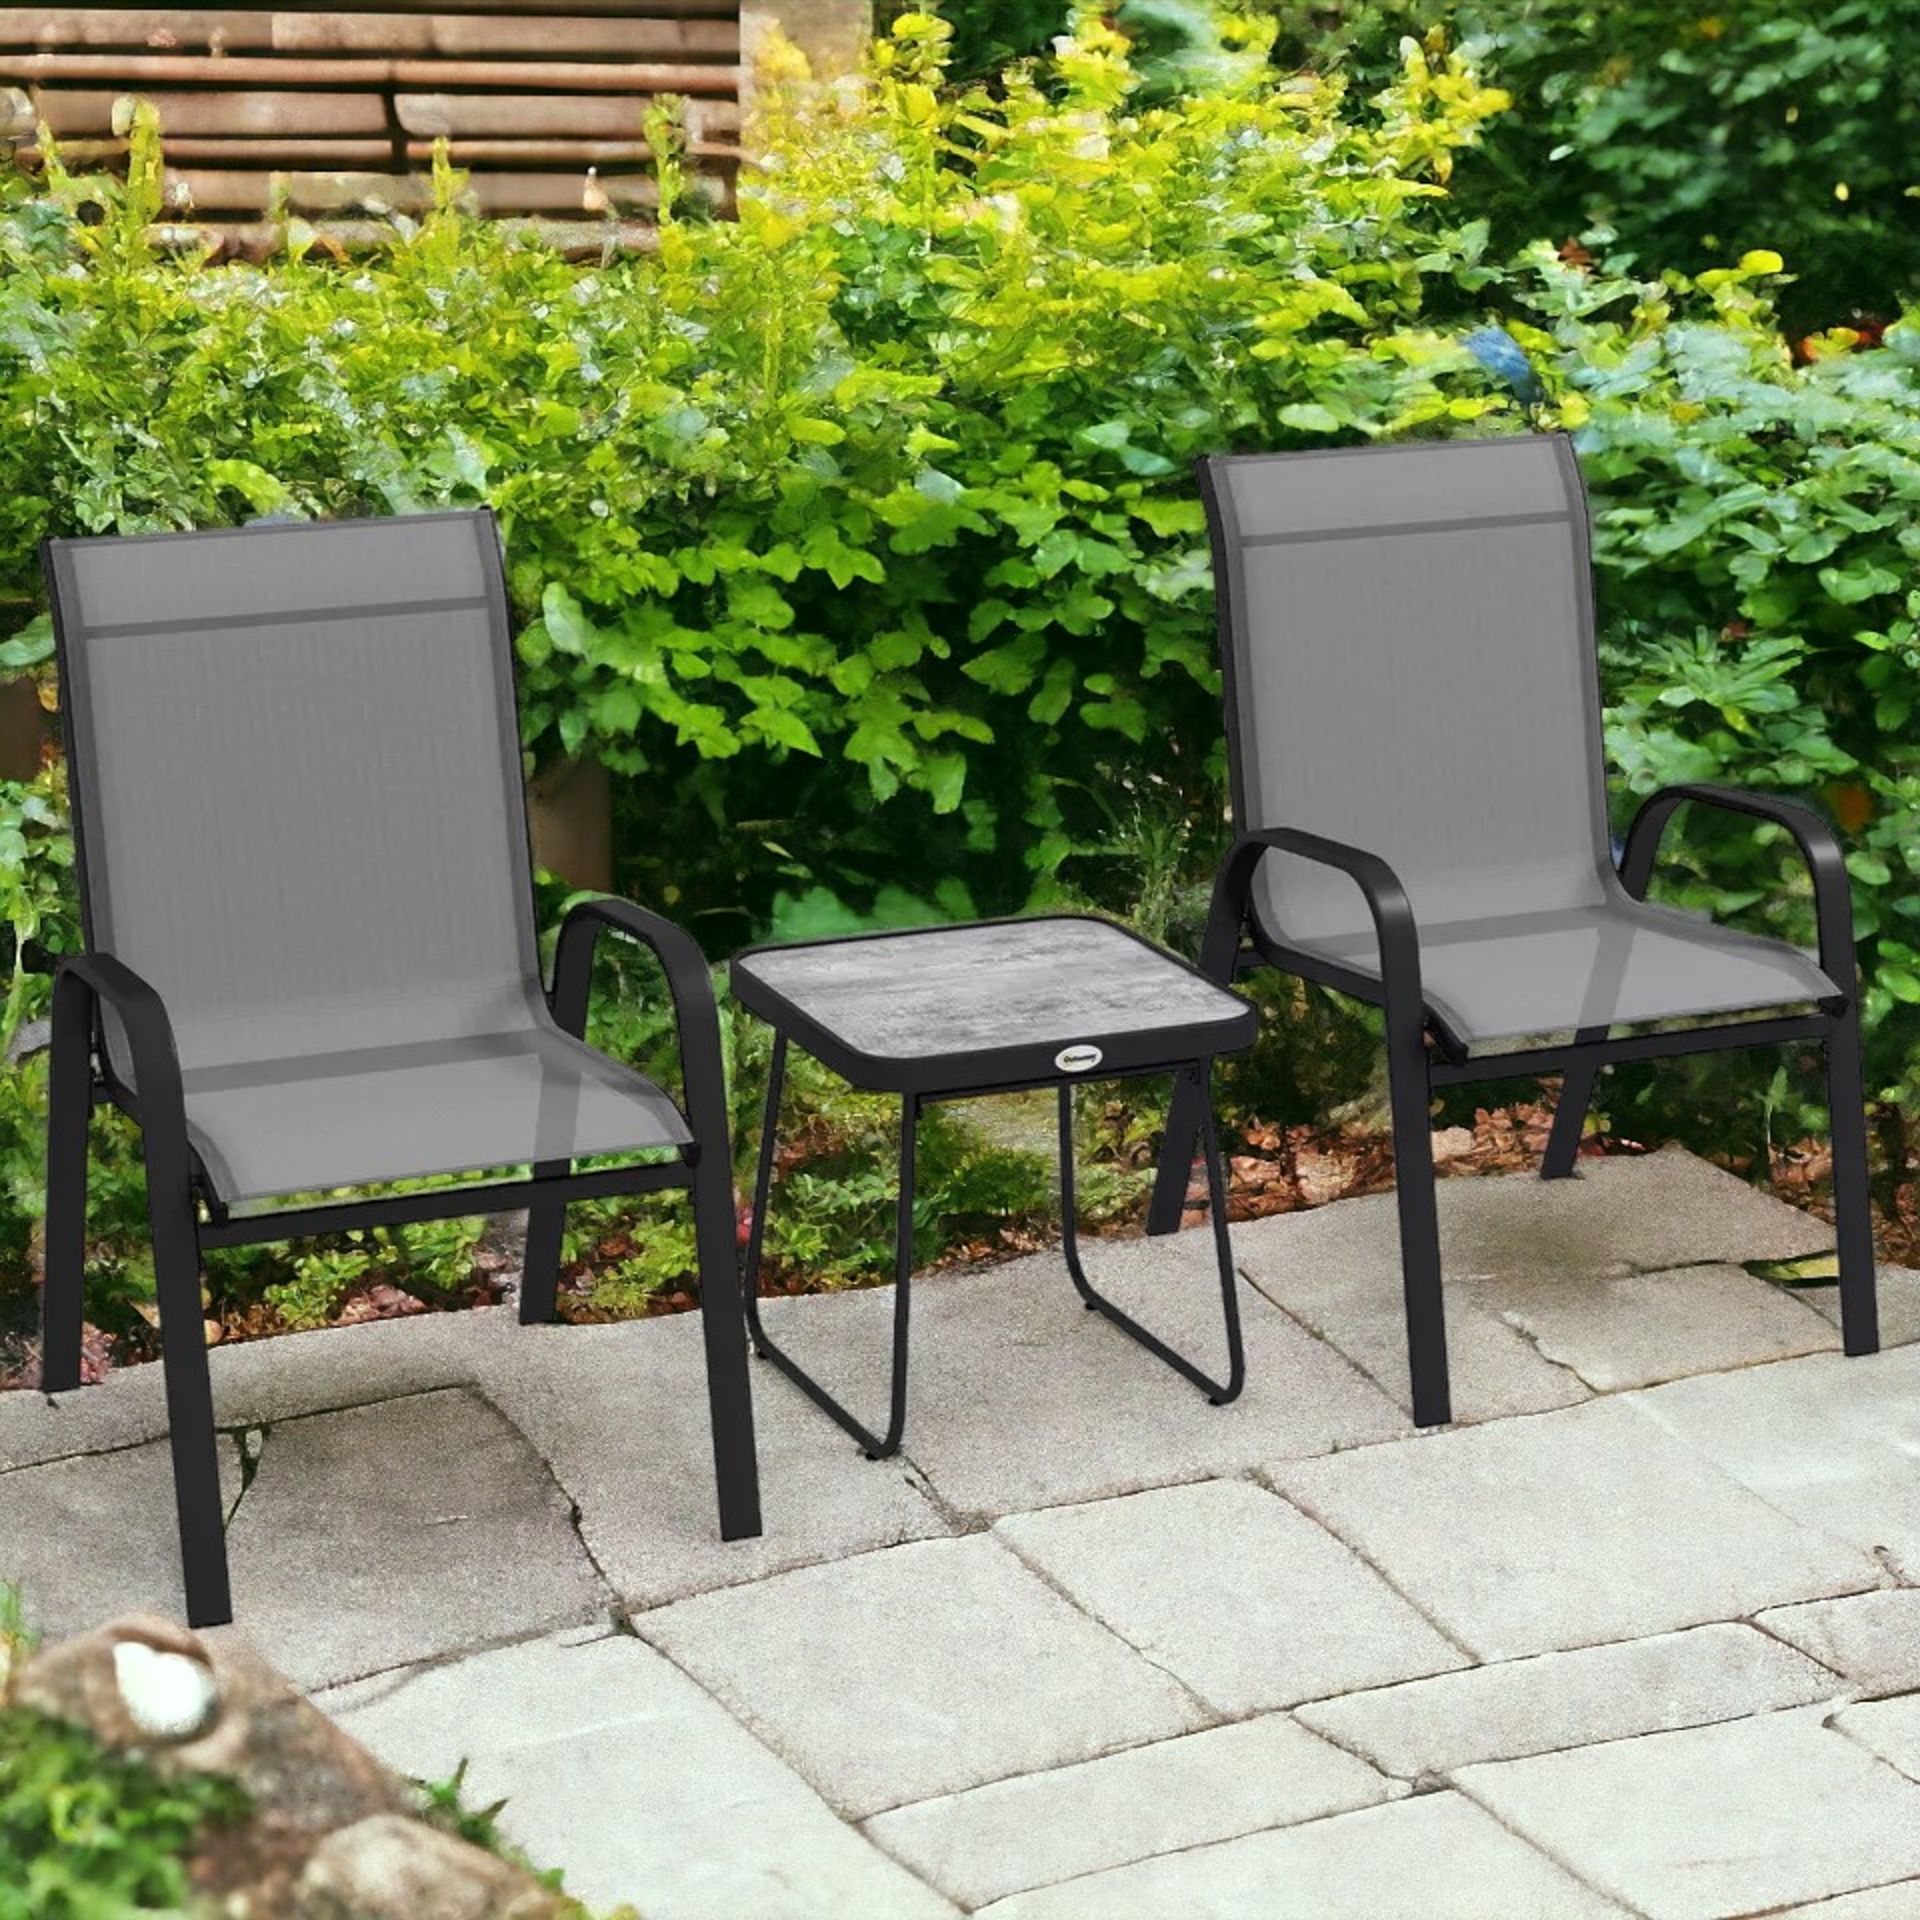 FREE DELIVERY - BRAND NEW 3PCS BISTRO SET WITH BREATHABLE MESH FABRIC STACKABLE CHAIRS LIGHT GREY - Image 2 of 2